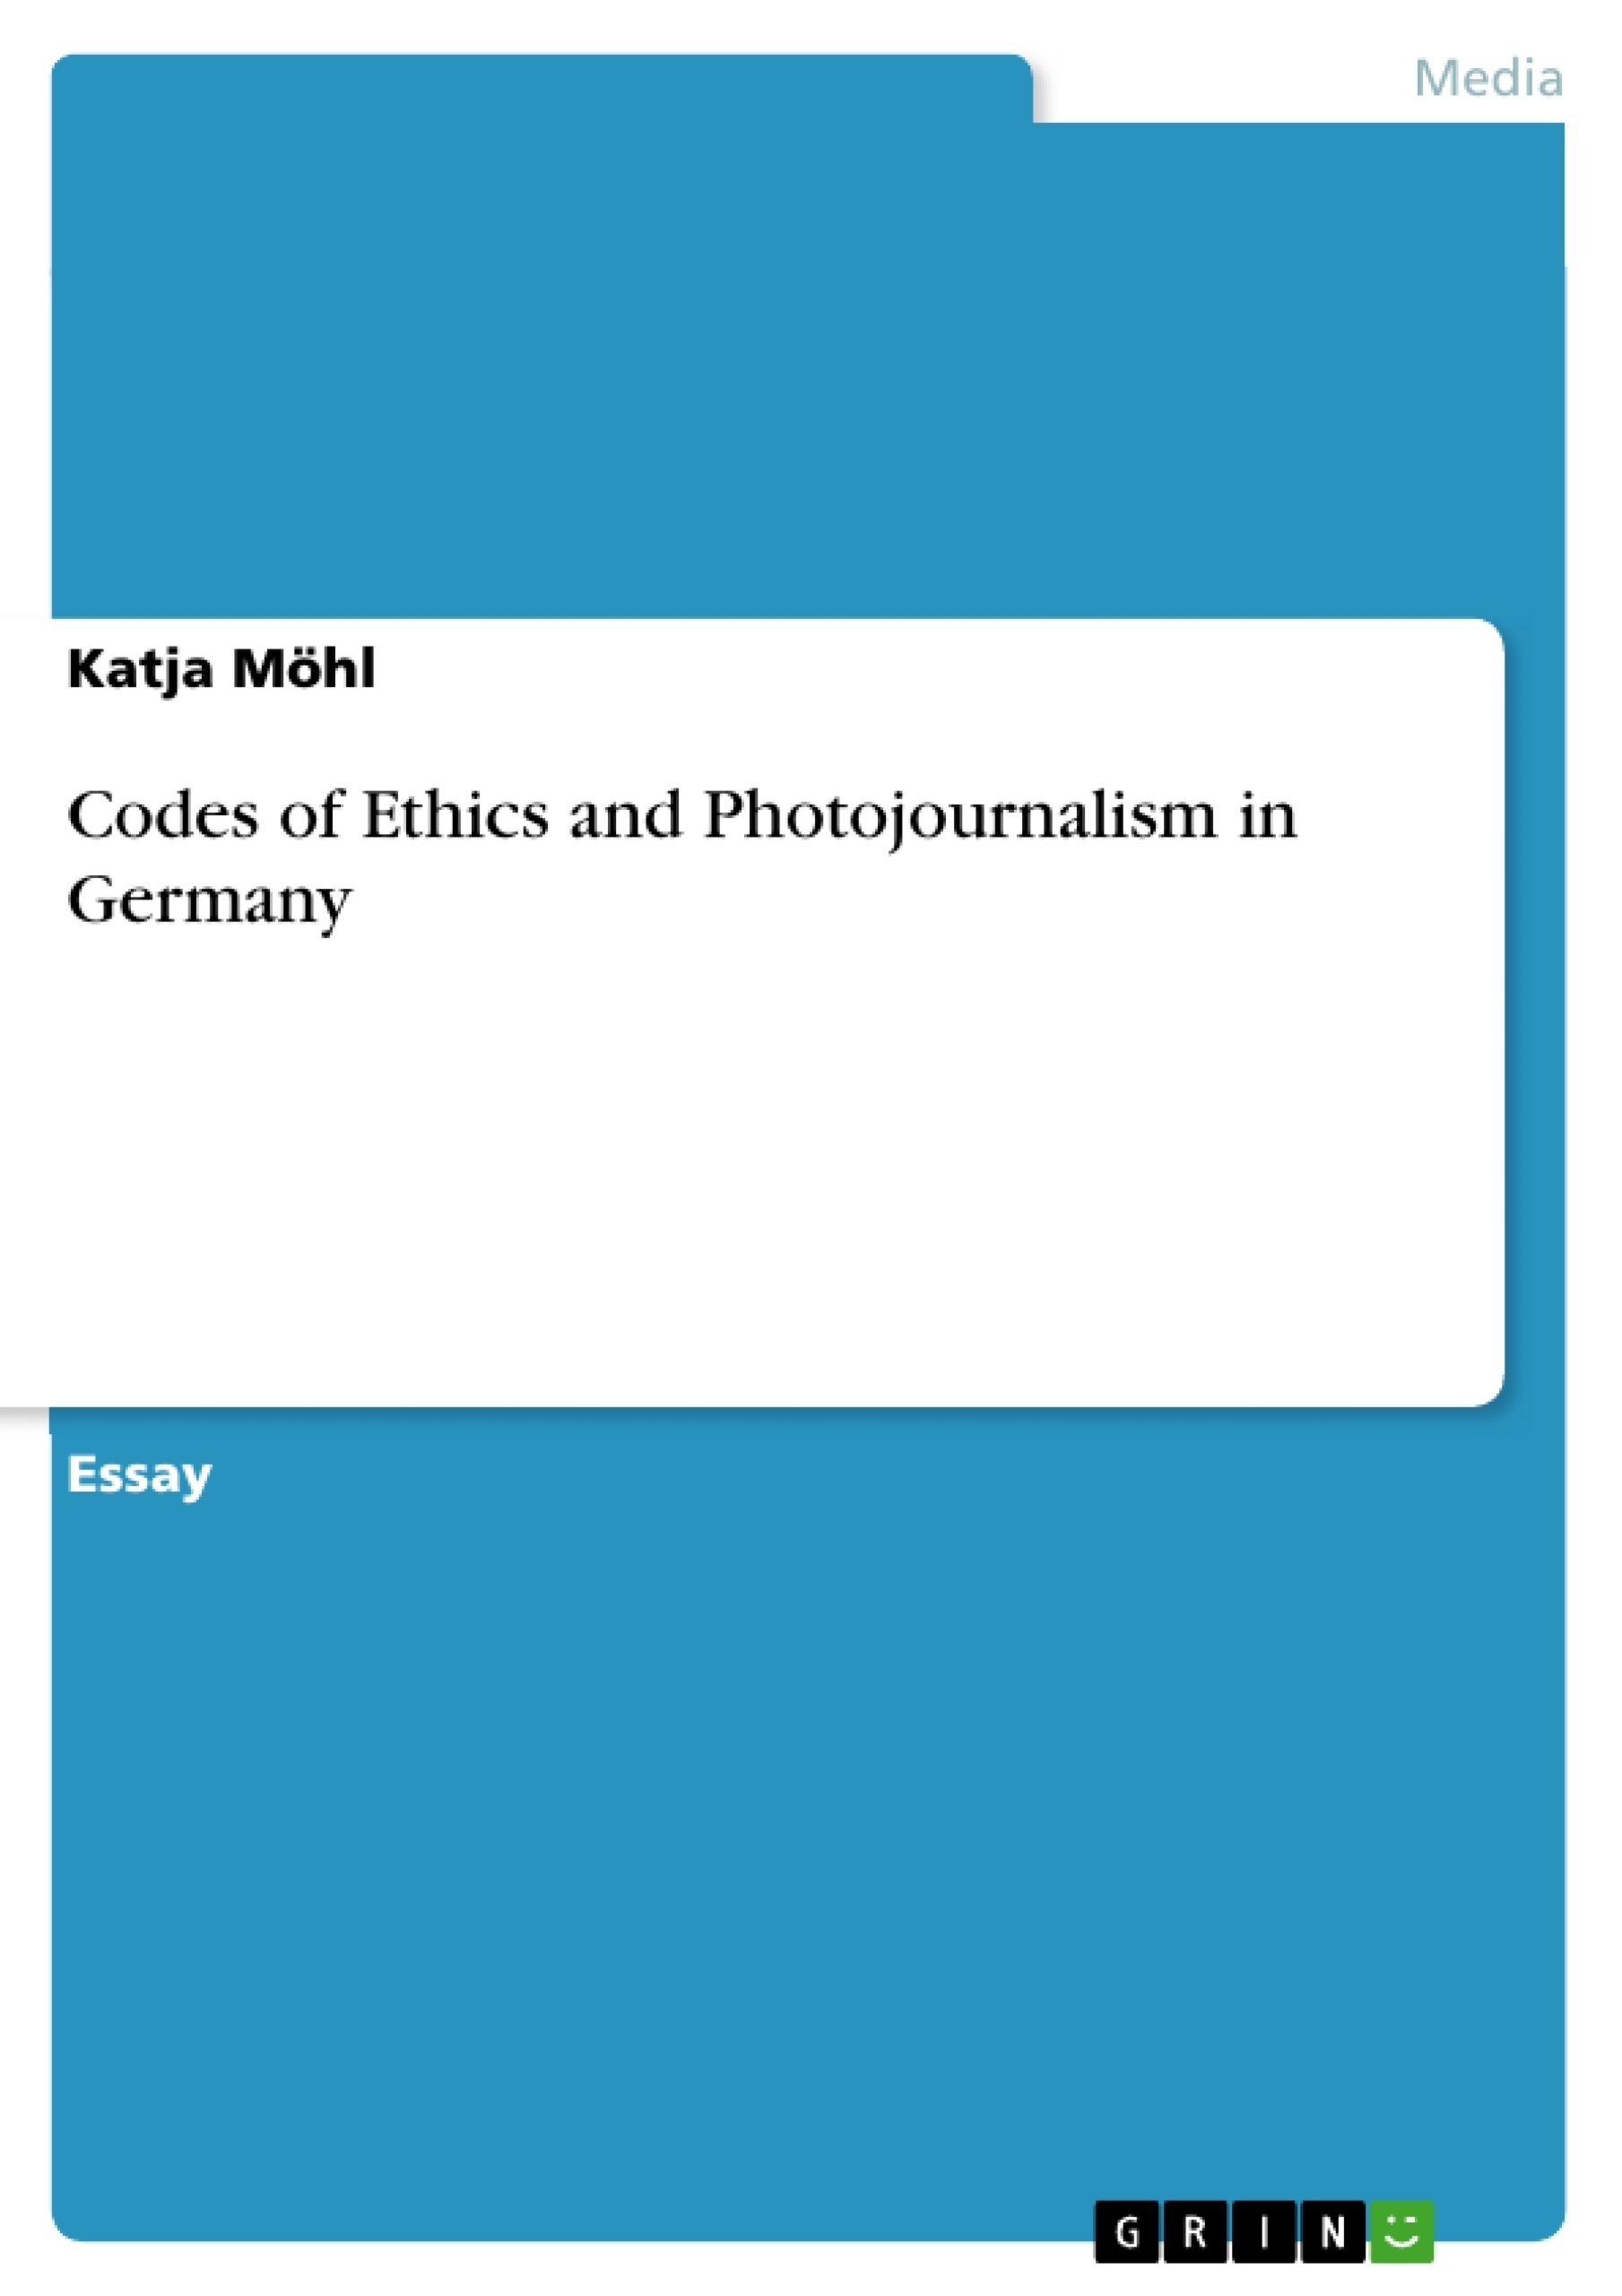 Título: Codes of Ethics and Photojournalism in Germany